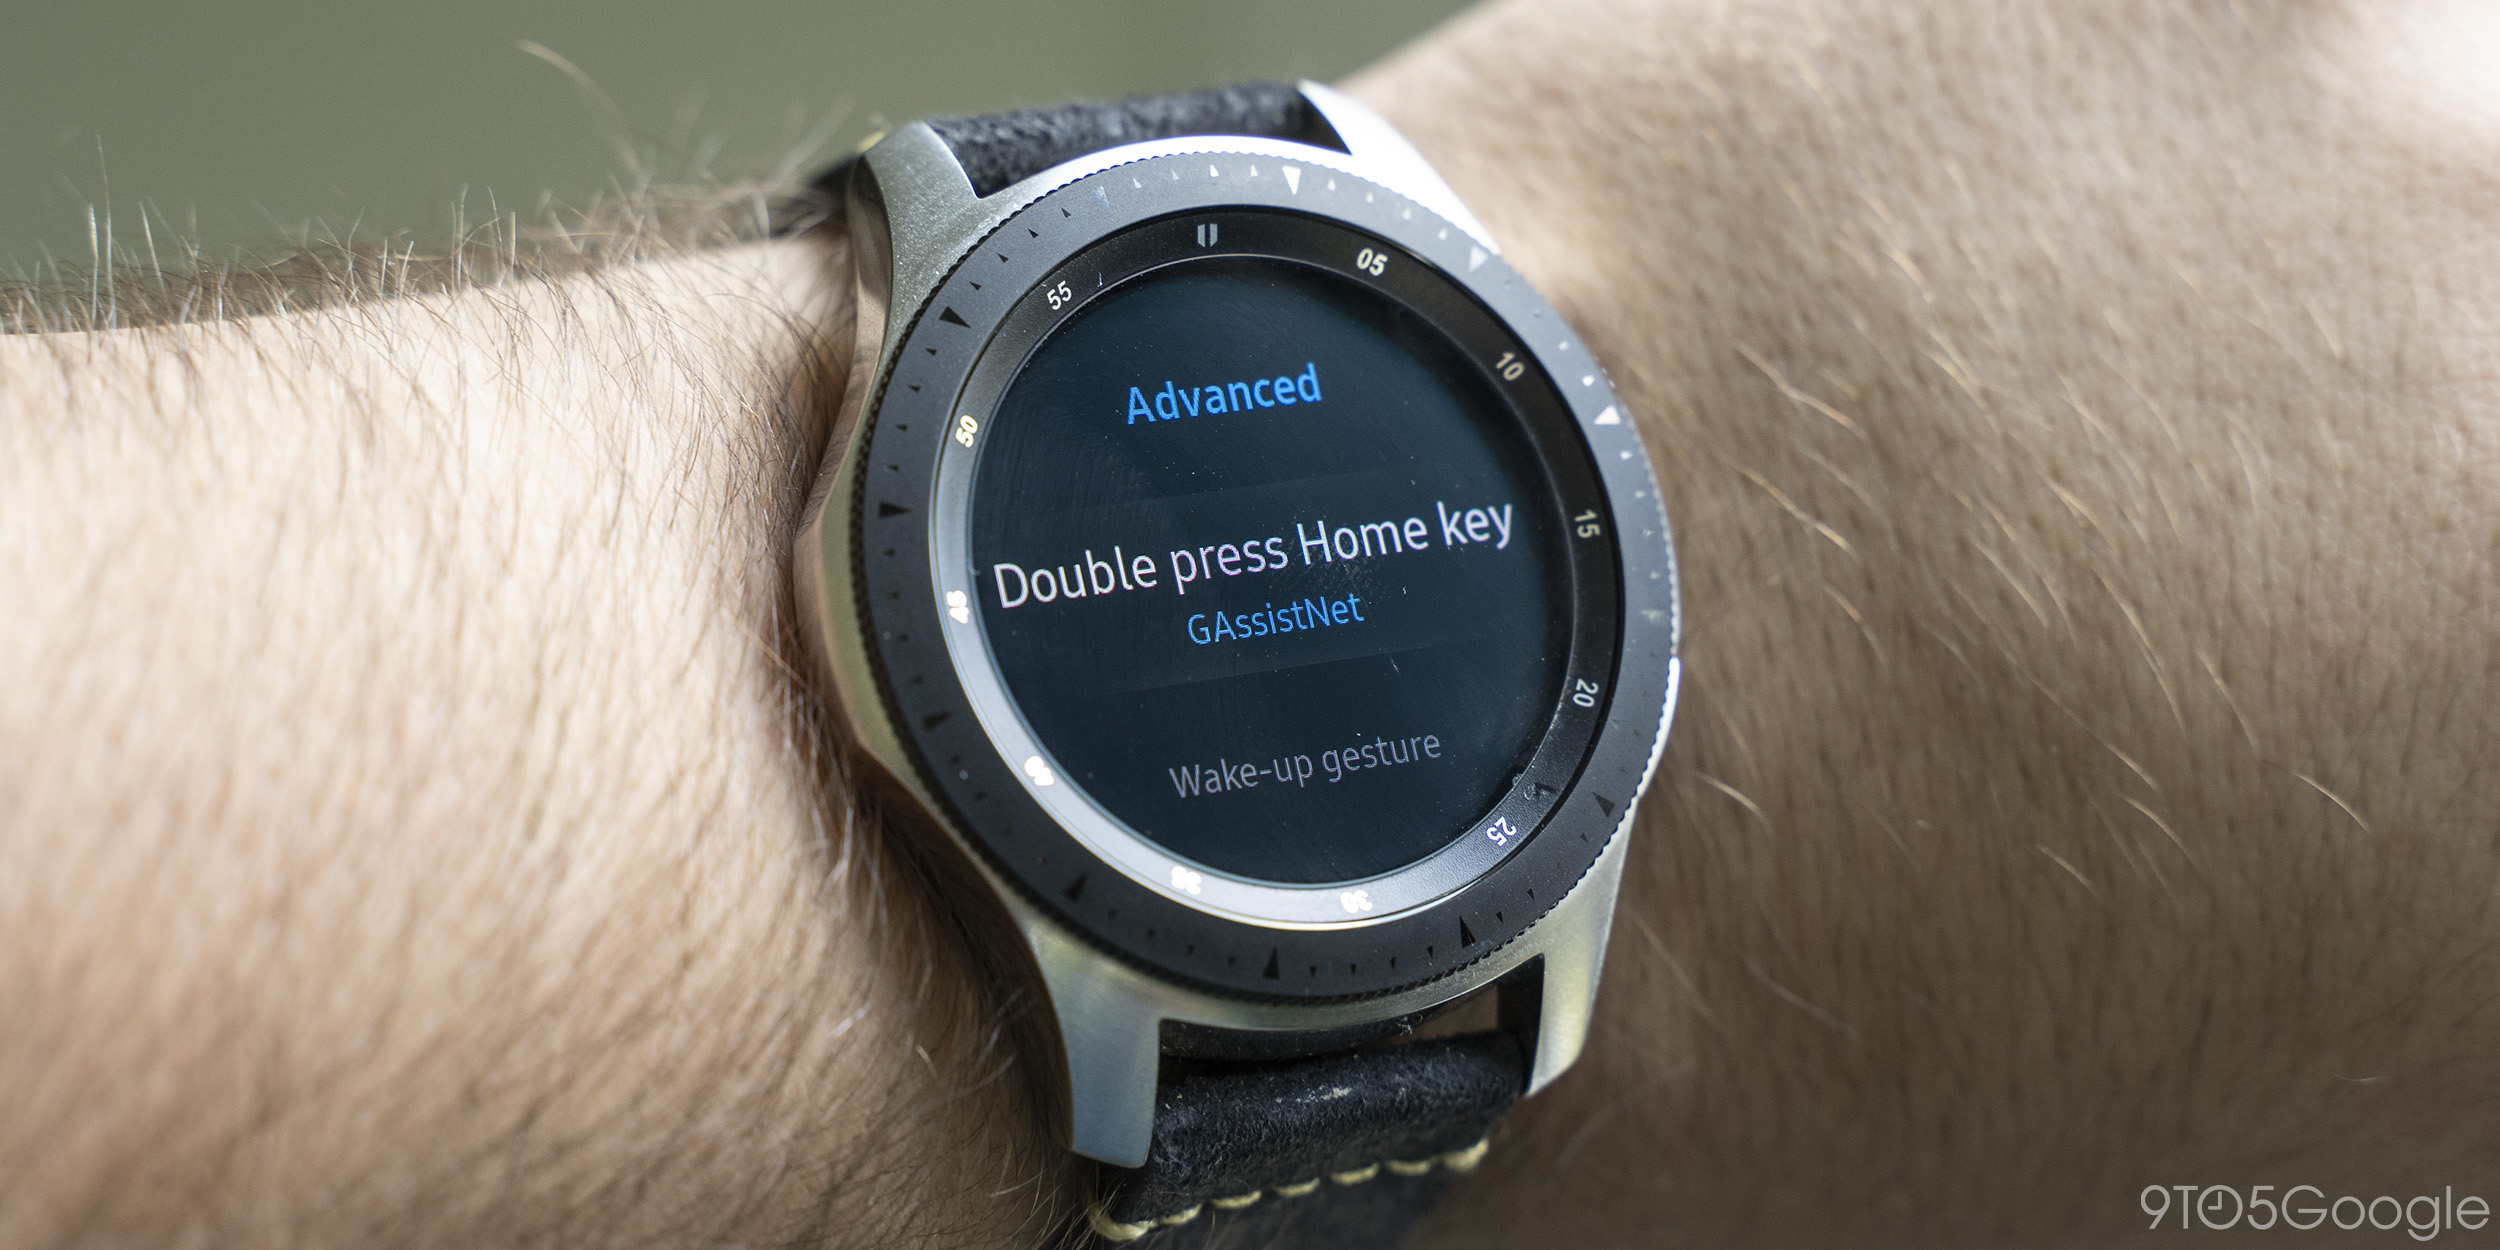 galaxy watch use google assistant